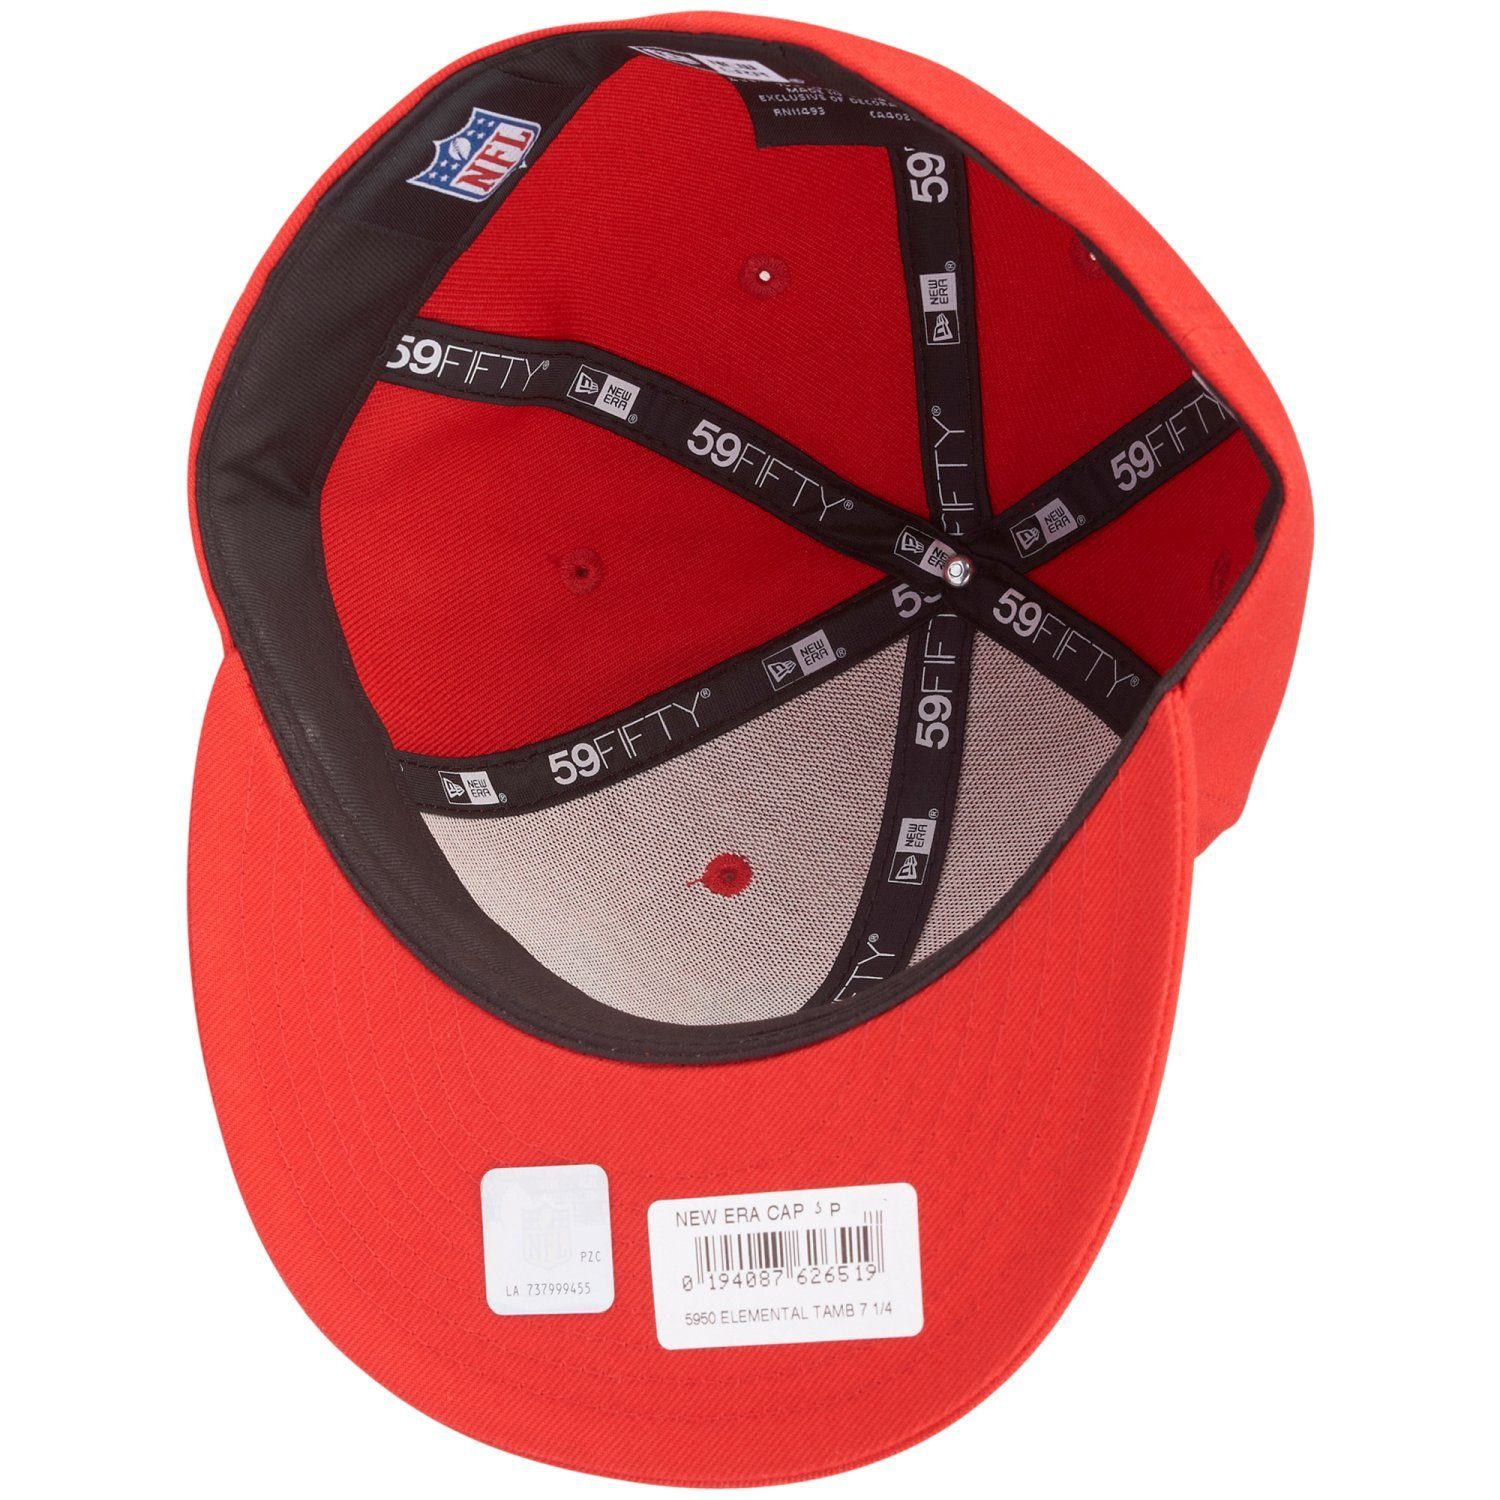 ELEMENTS Cap Era 59Fifty New Buccaneers Bay Fitted Tampa